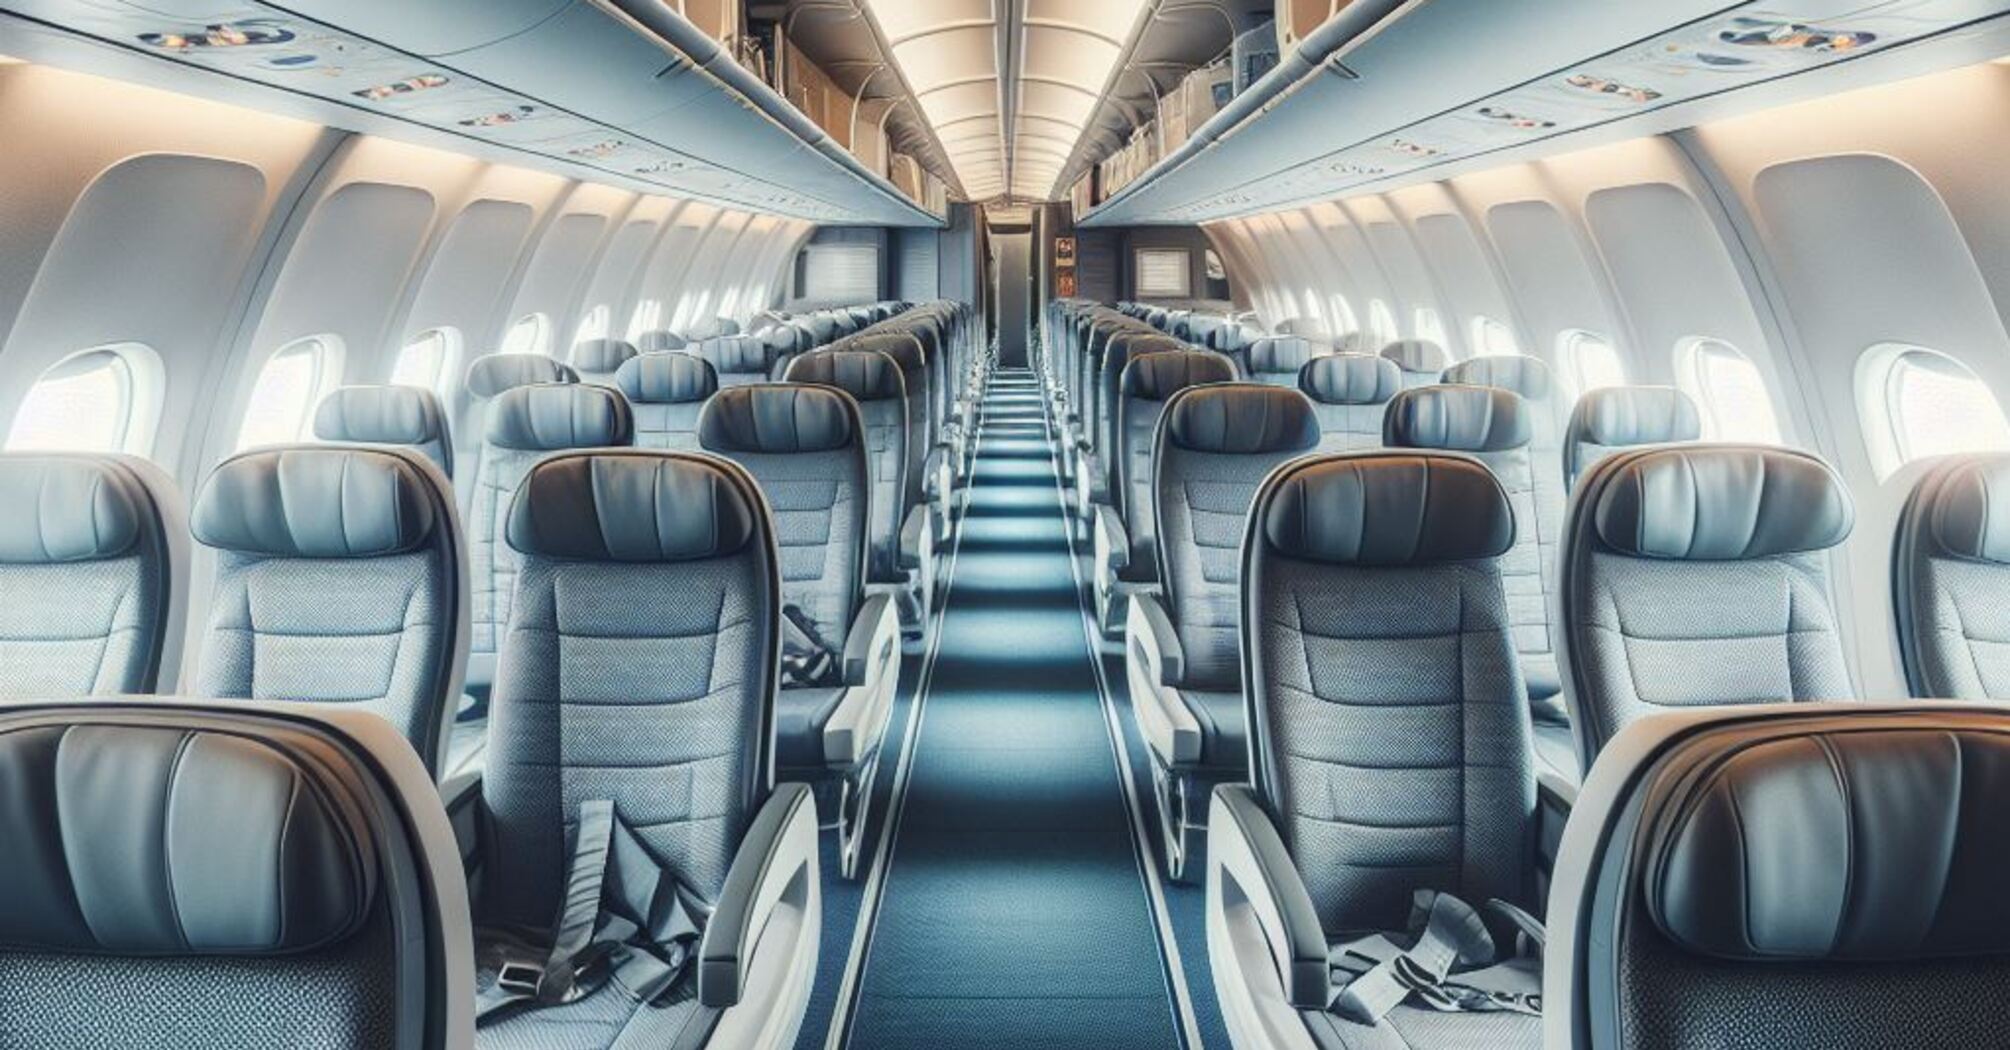 The expert named the best and worst seats on the plane: where passengers with anxiety, long legs, and the need for sleep should sit